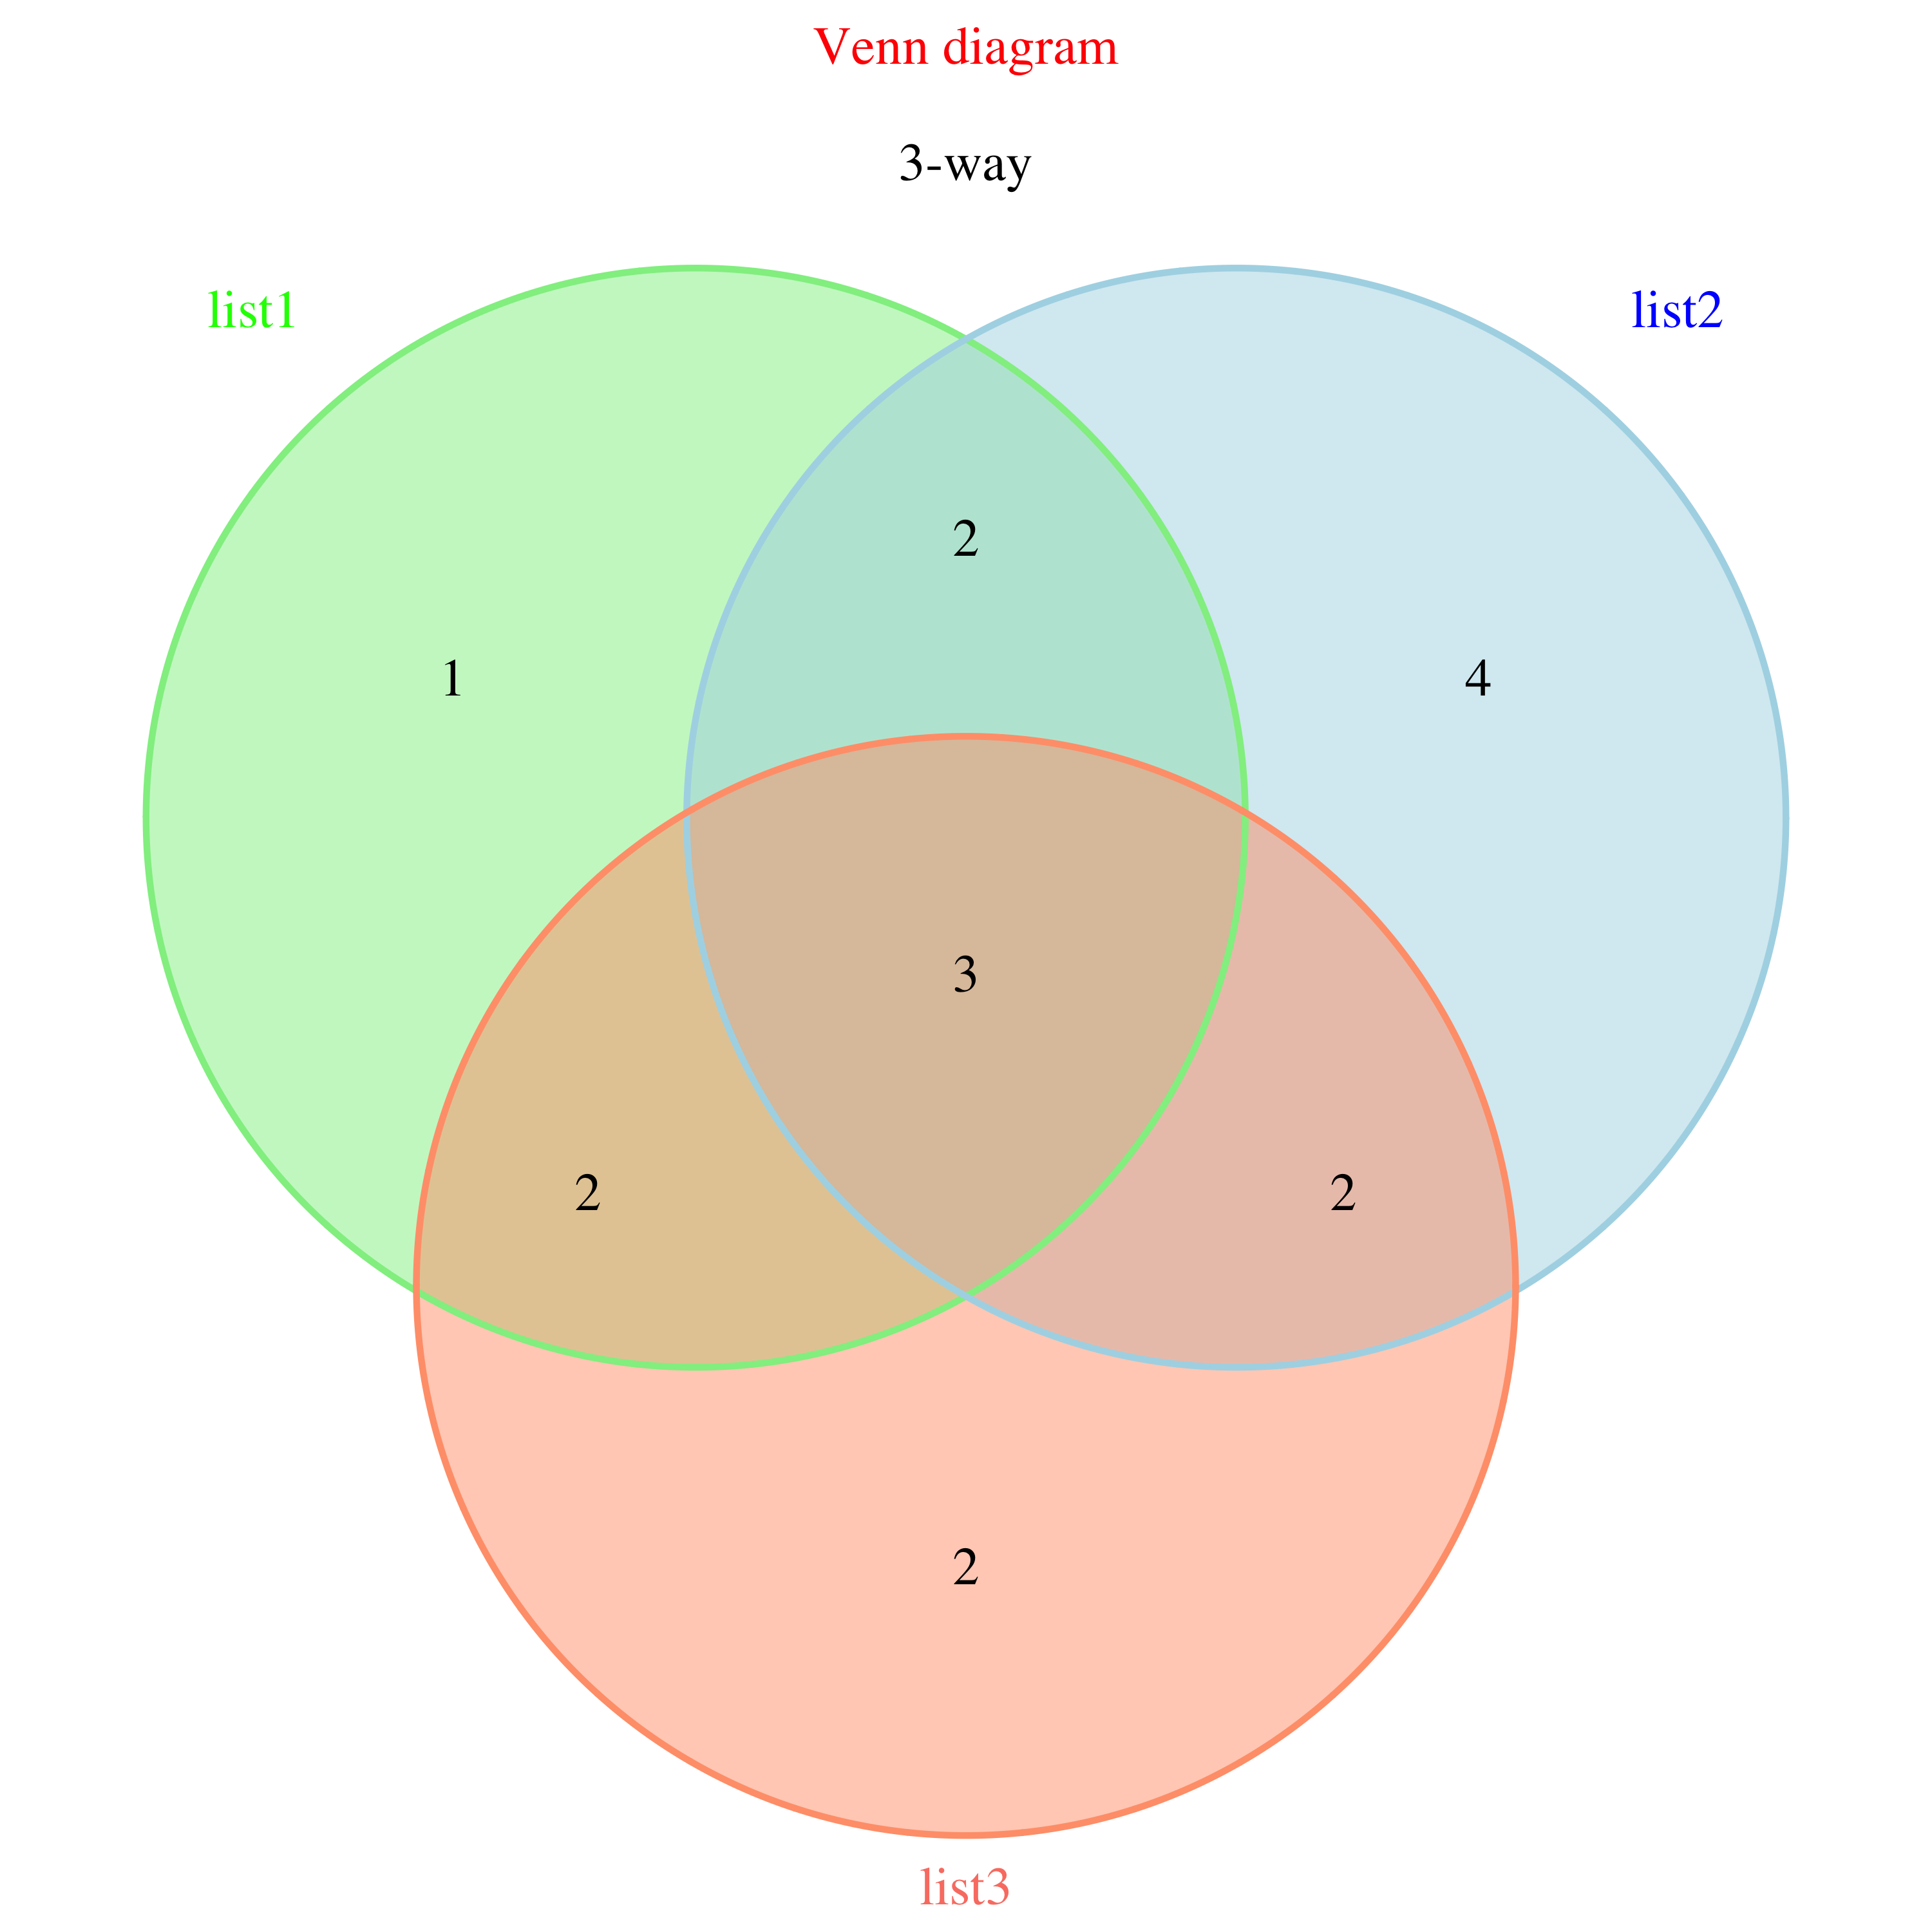 15-2-venn-diagram-function-from-venndiagram-package-introduction-to-r